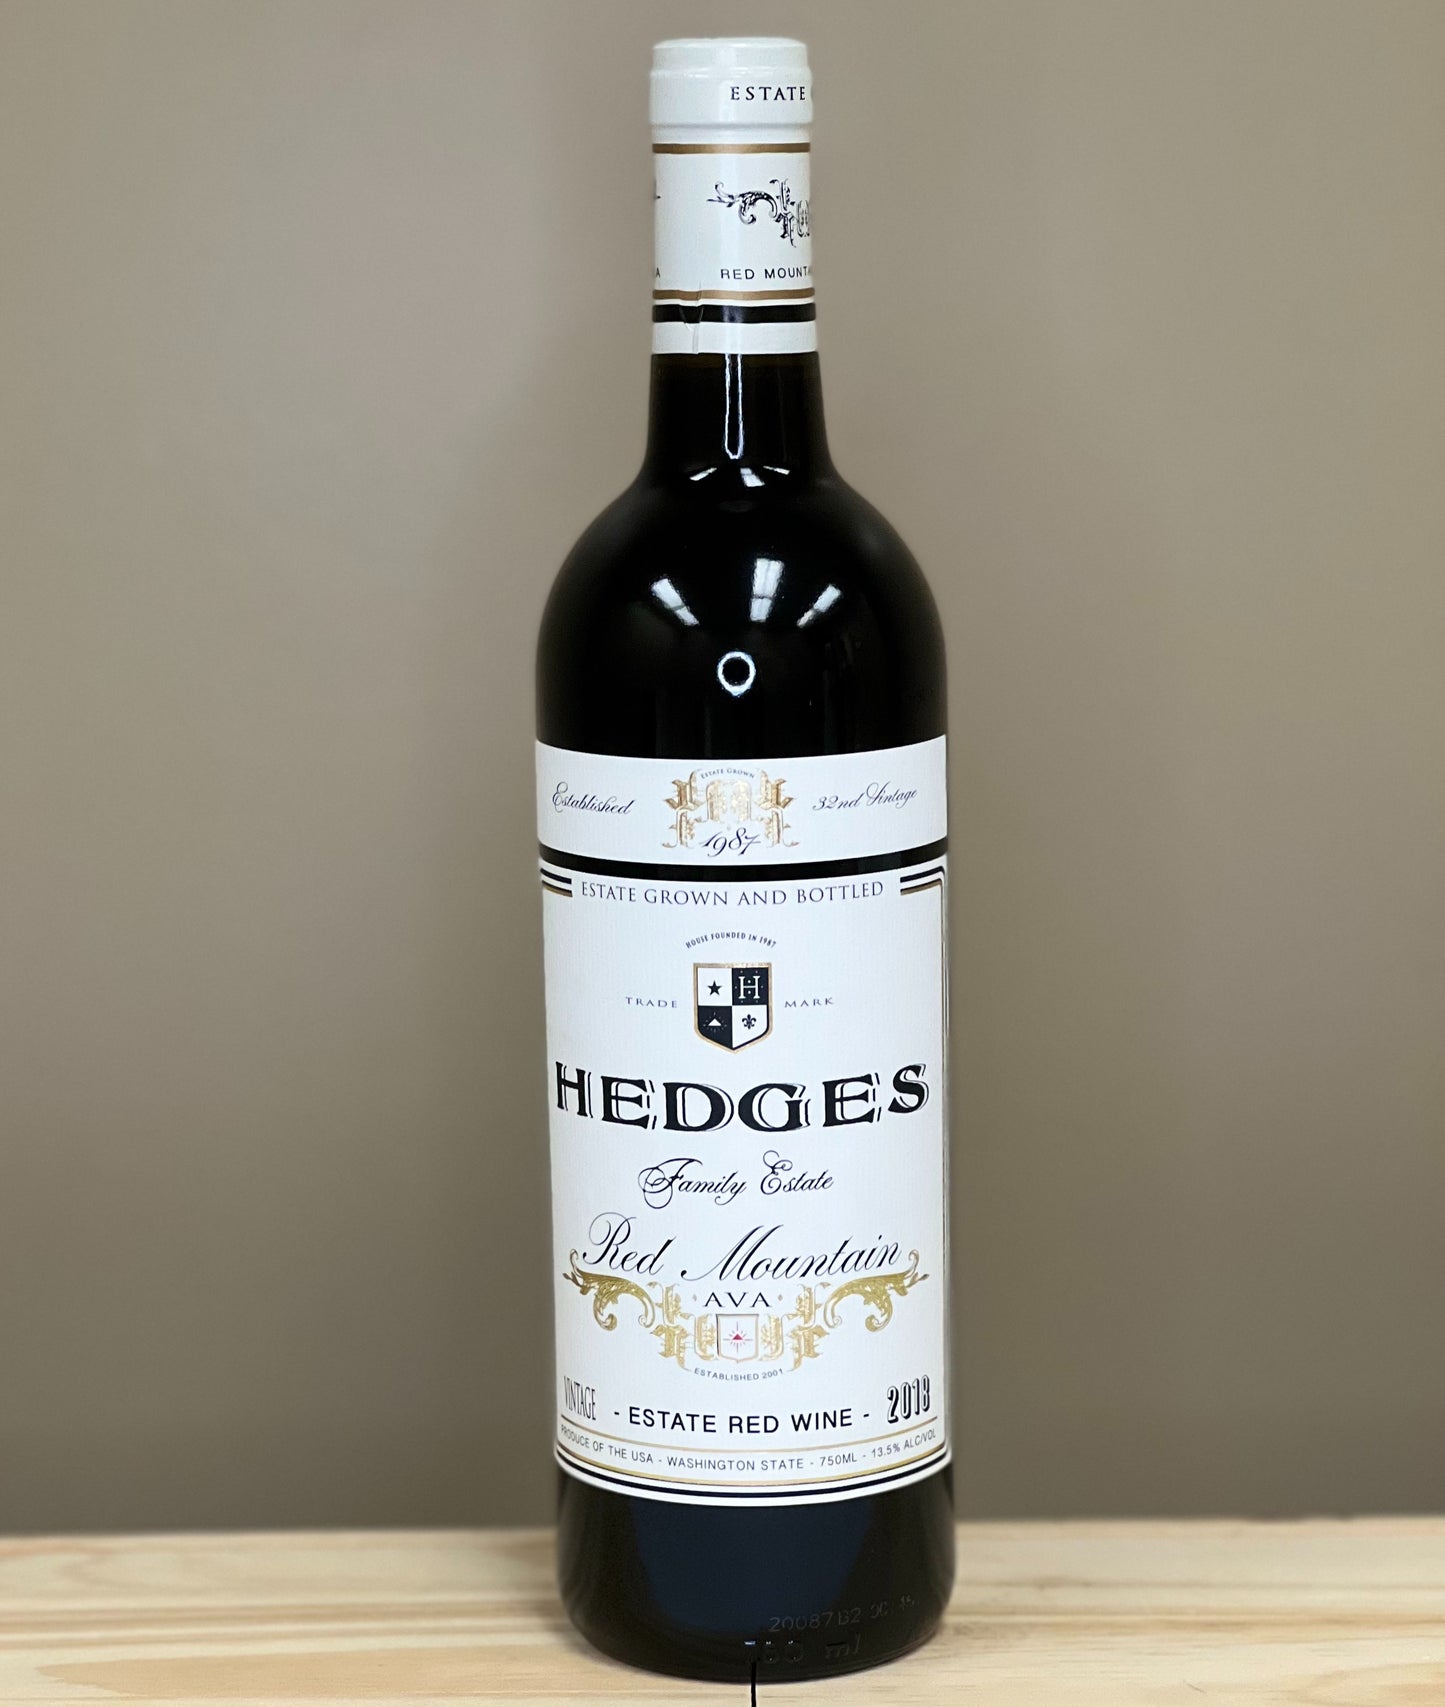 Hedges Family, Estate Red Wine 2018, Red Mountain, Columbia Valley, Washington